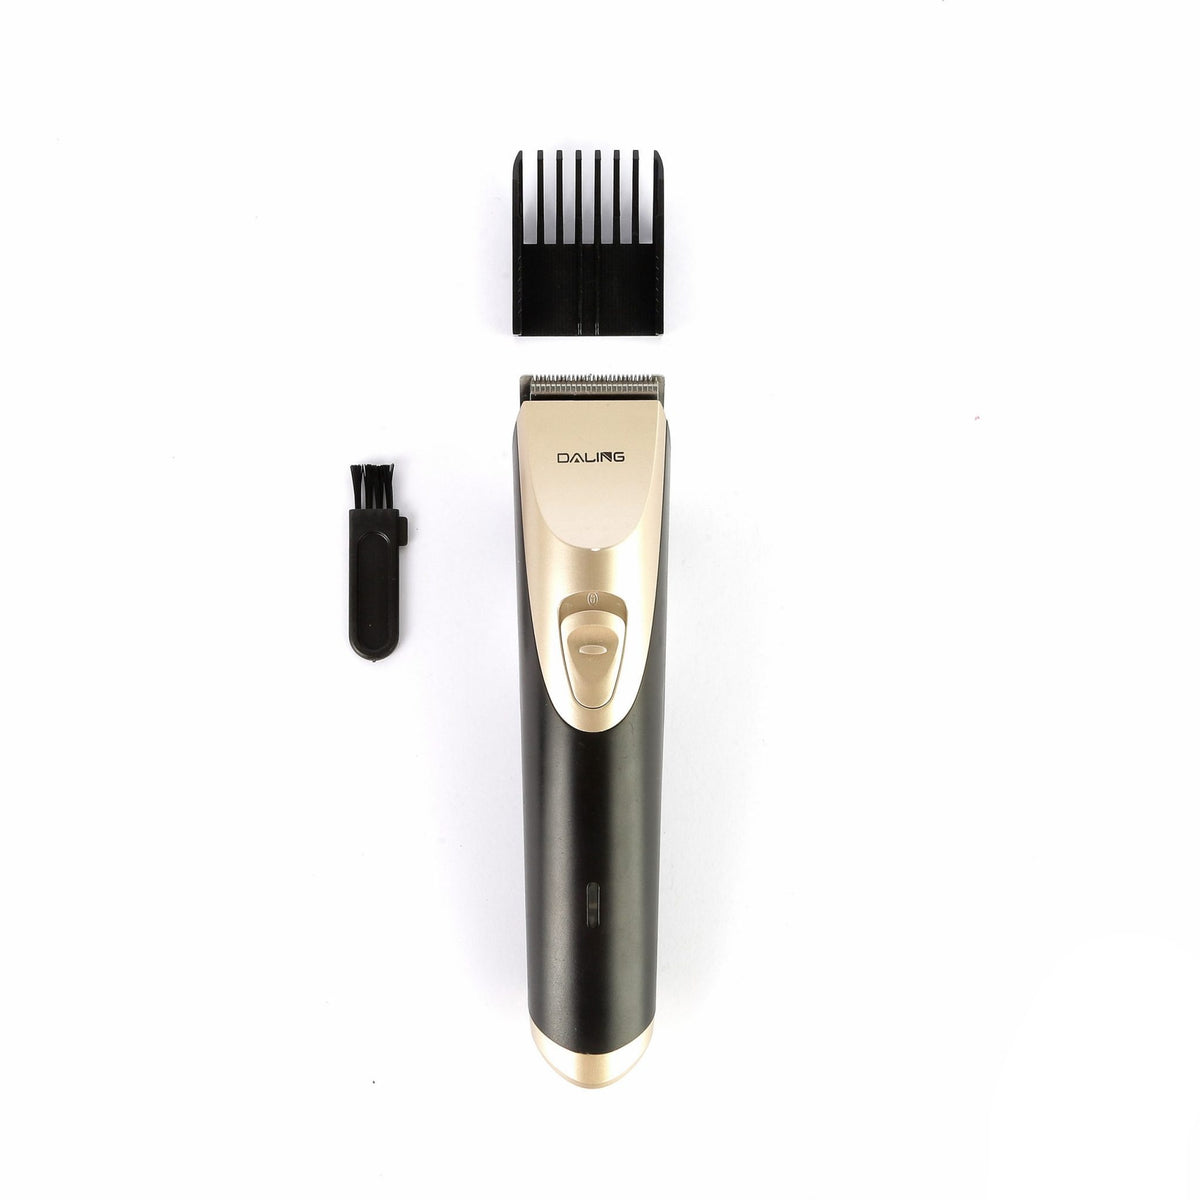 Daling Professional Electric Hair Clipper DL-1065 freeshipping - lasertag.pk